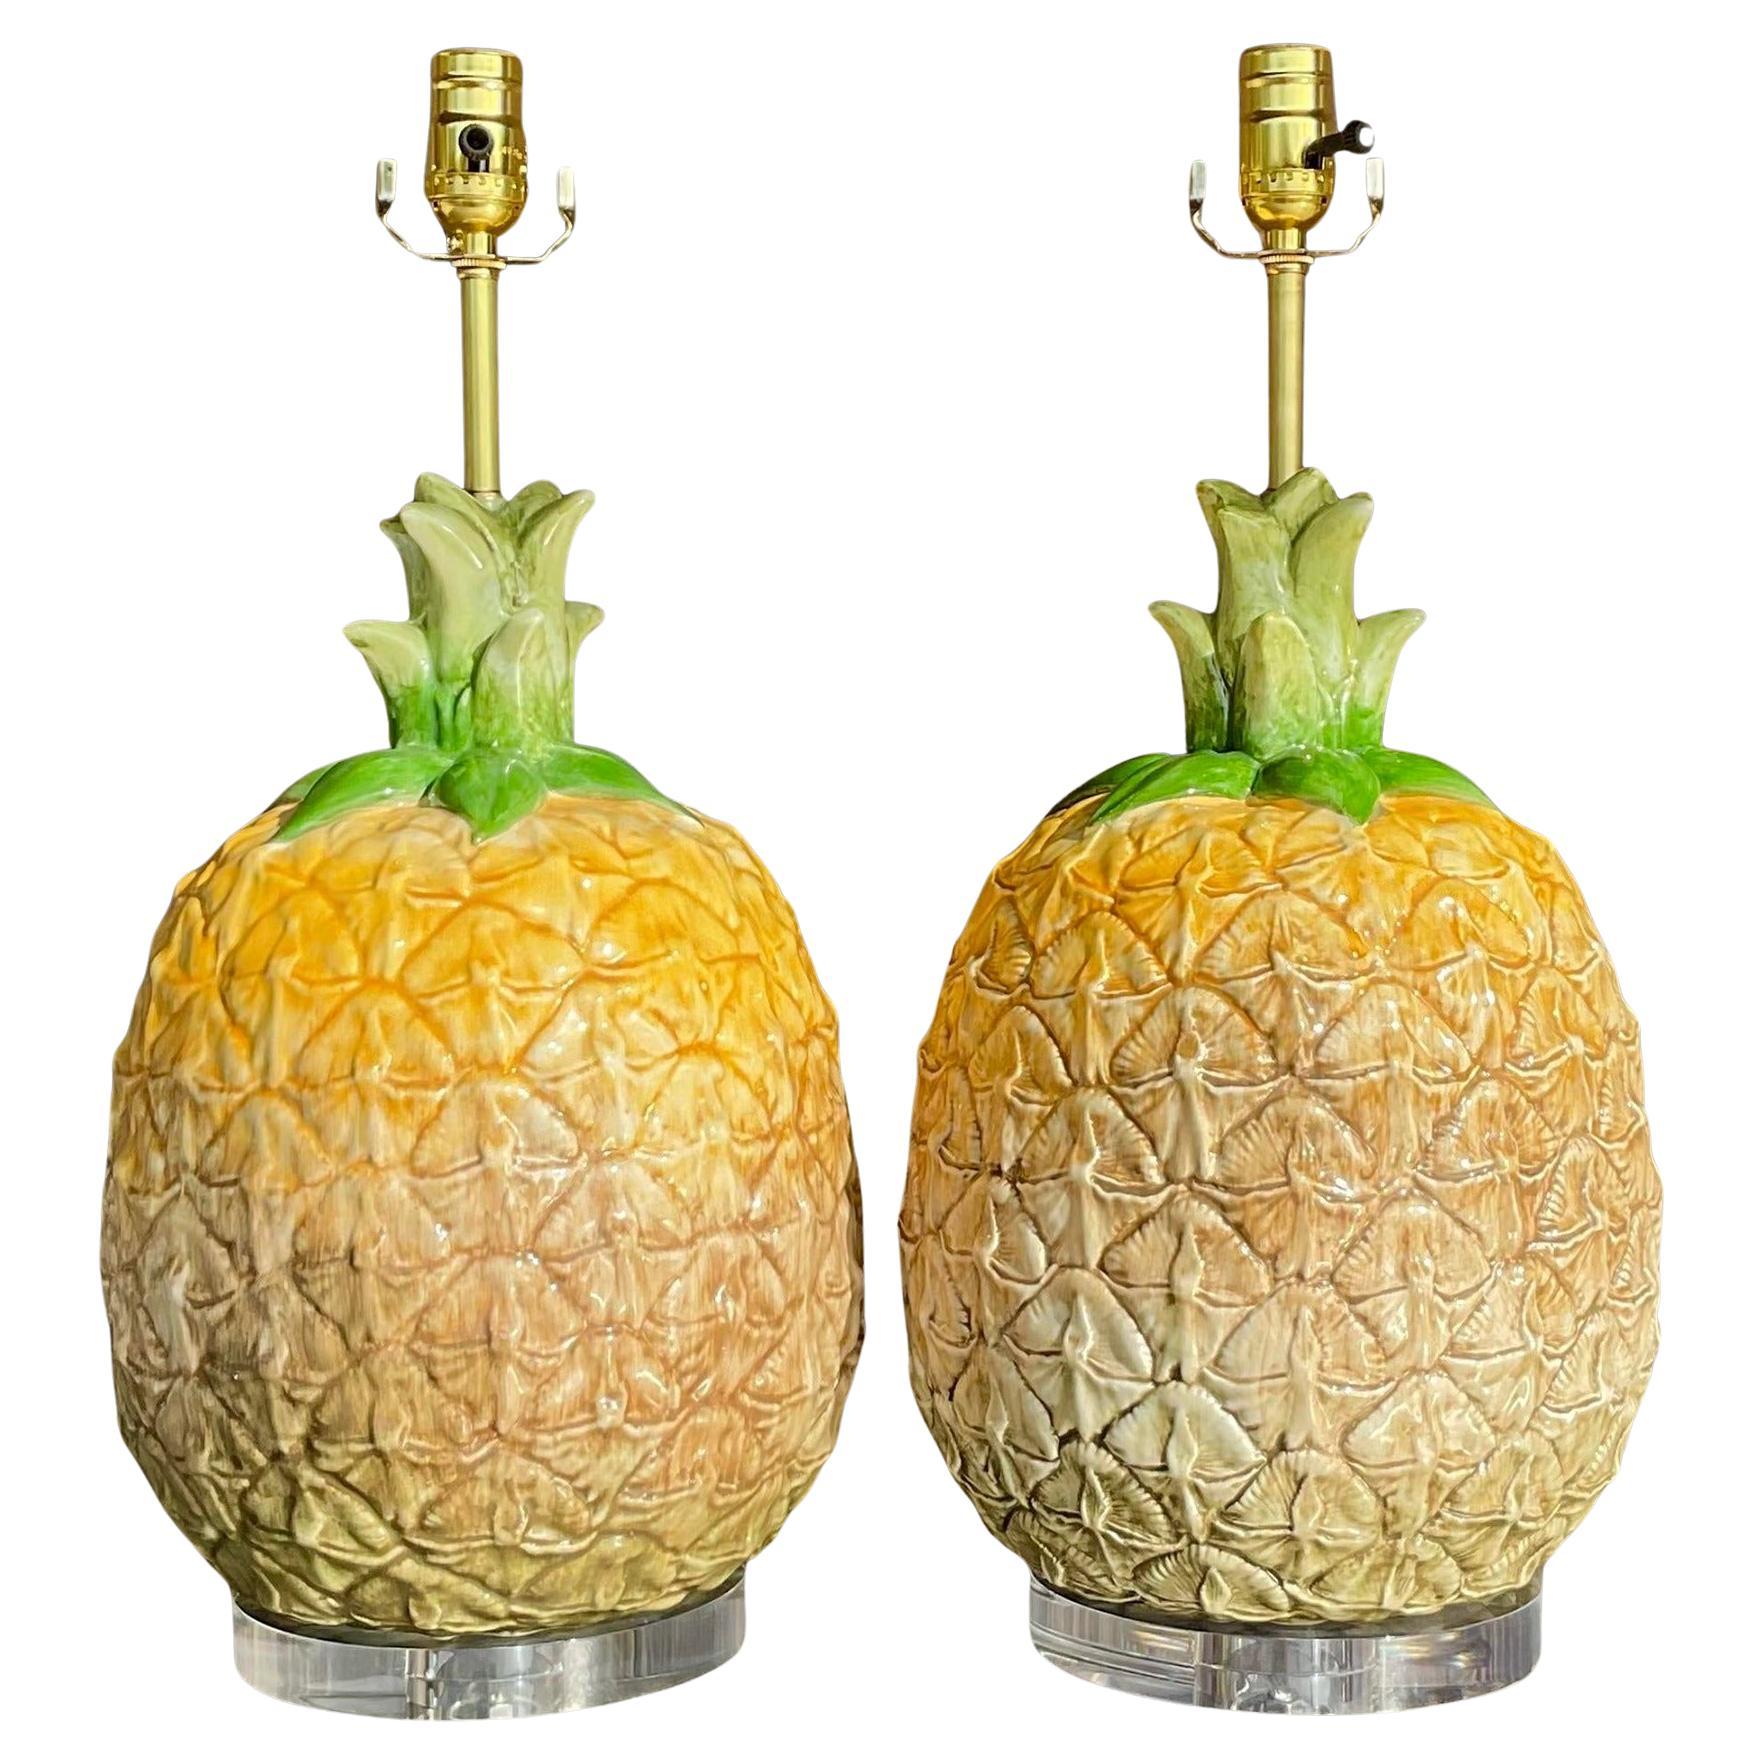 Vintage Ceramic Pineapple Lamp - a Pair For Sale